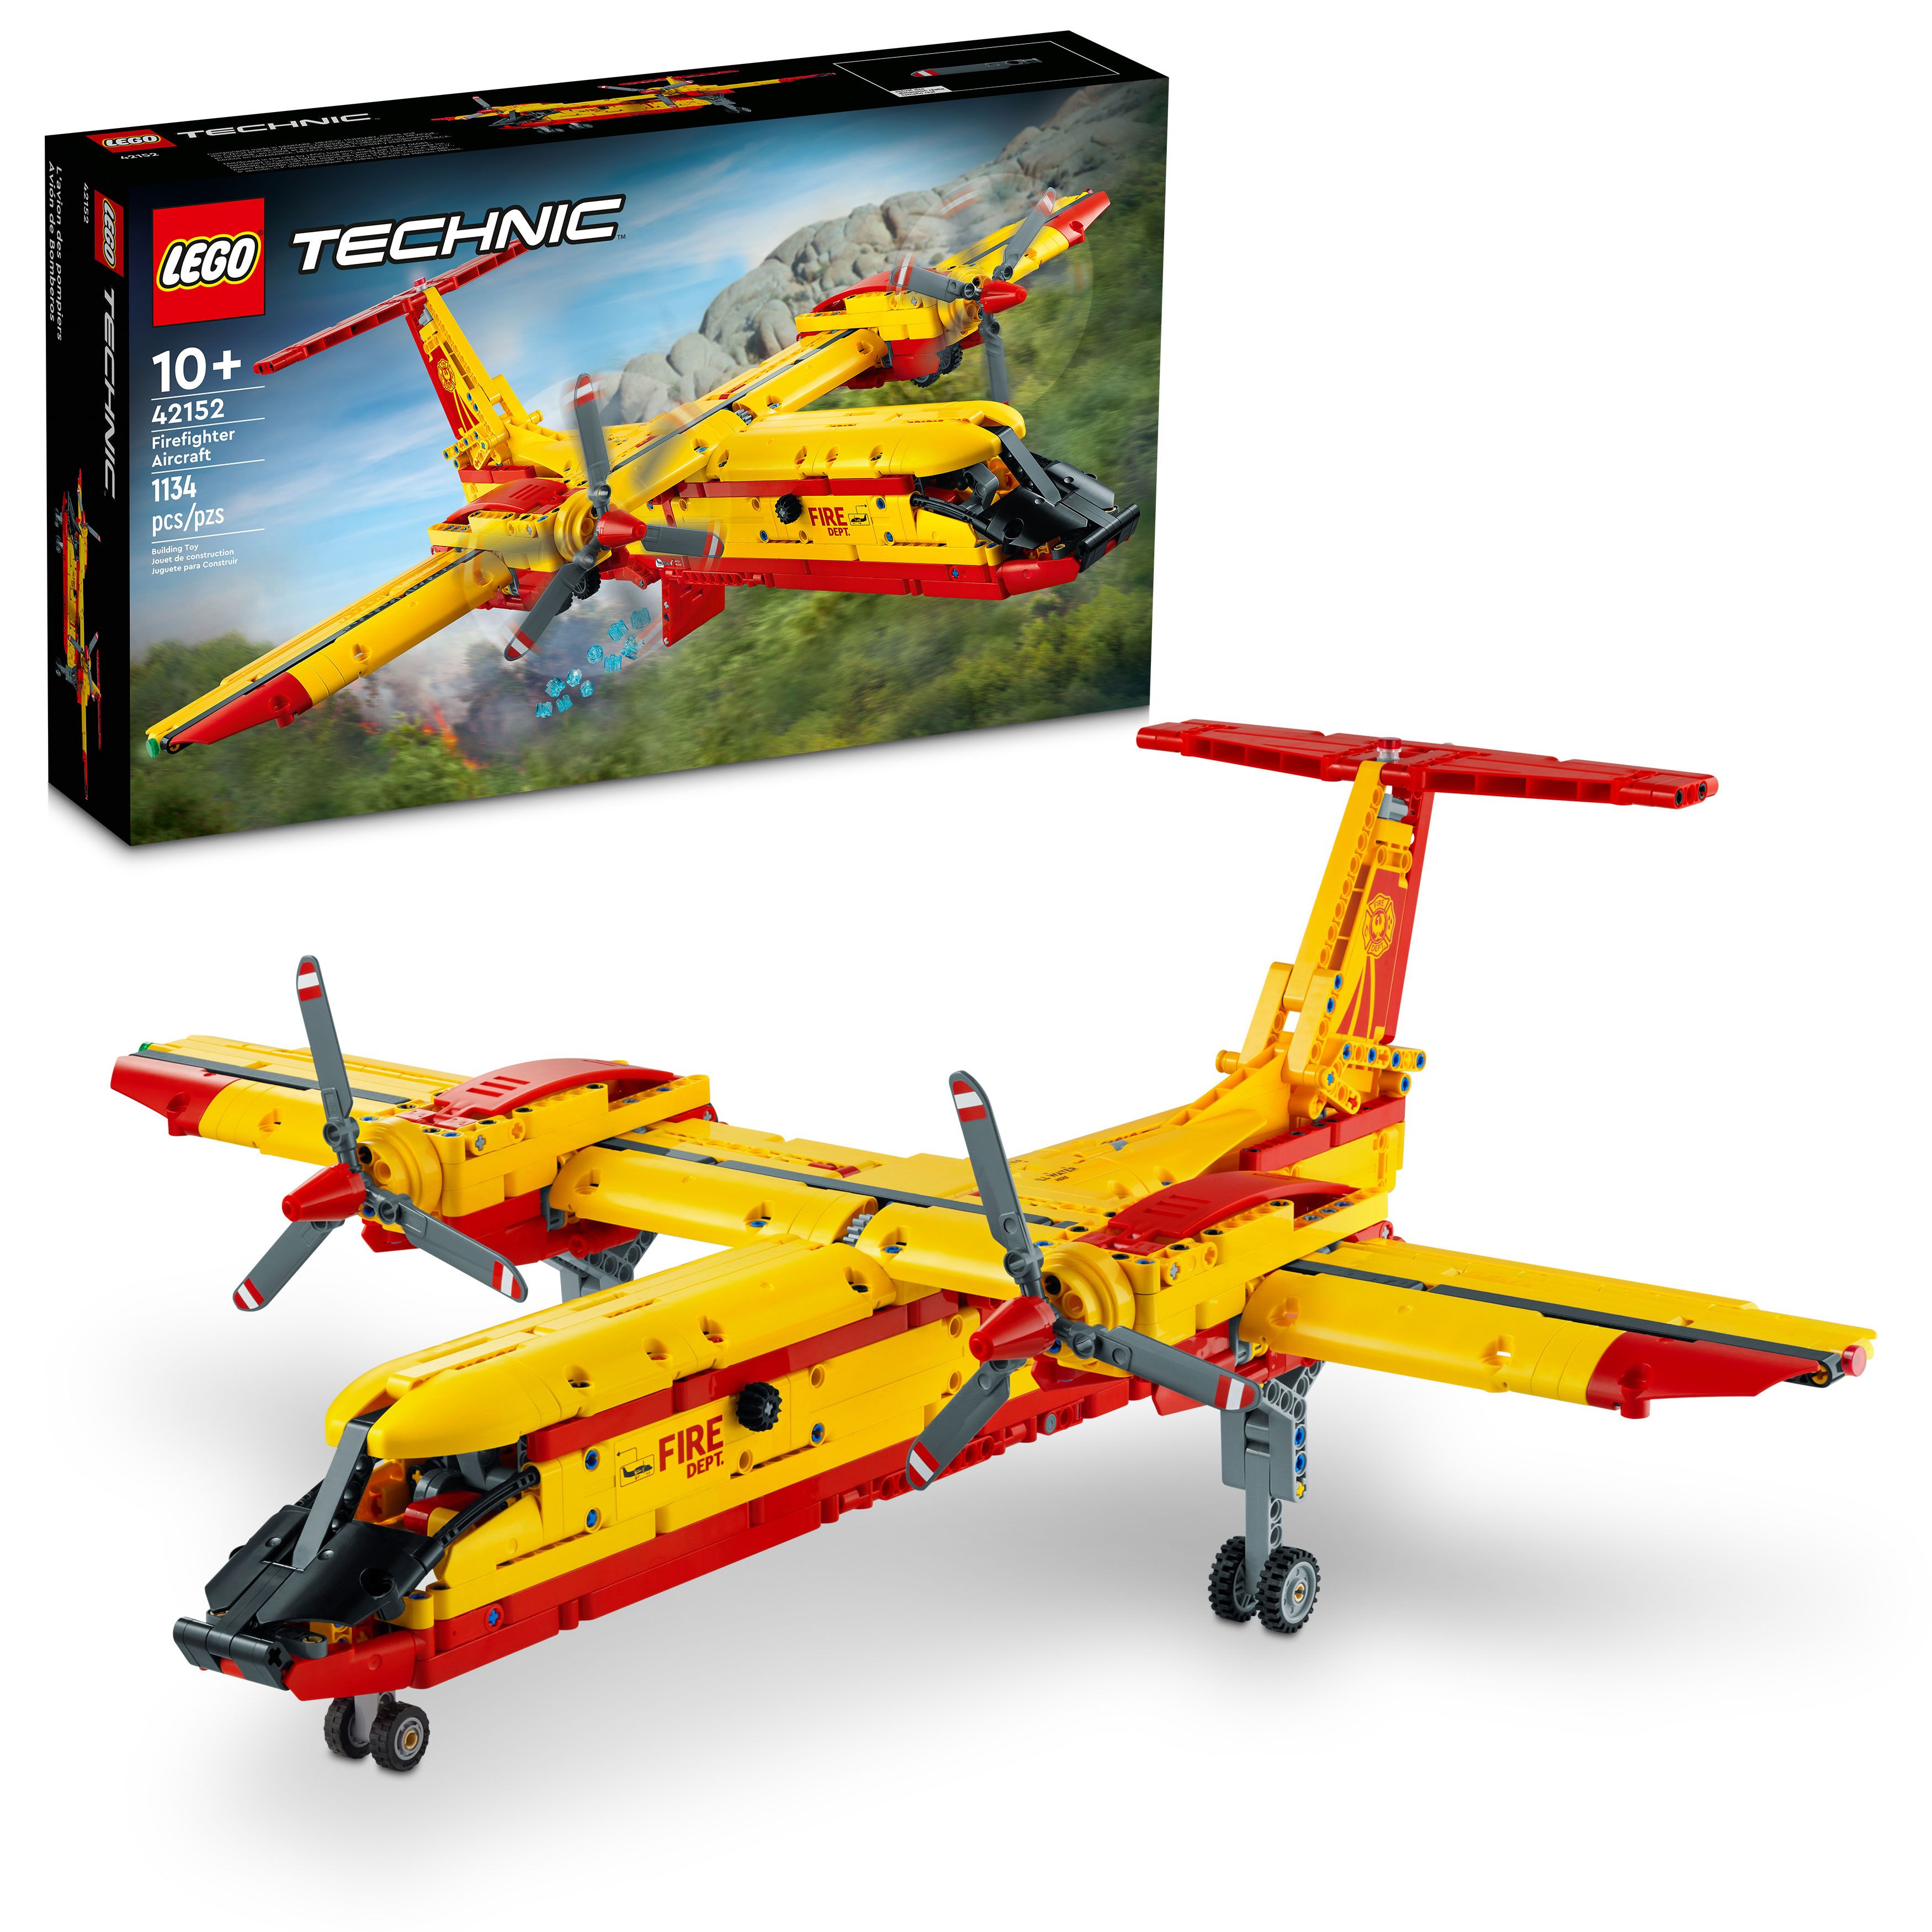 LEGO Technic Firefighter Aircraft Building Toy, Model Airplane Set 42152, with Authentic Fire Rescue Details - Walmart.com